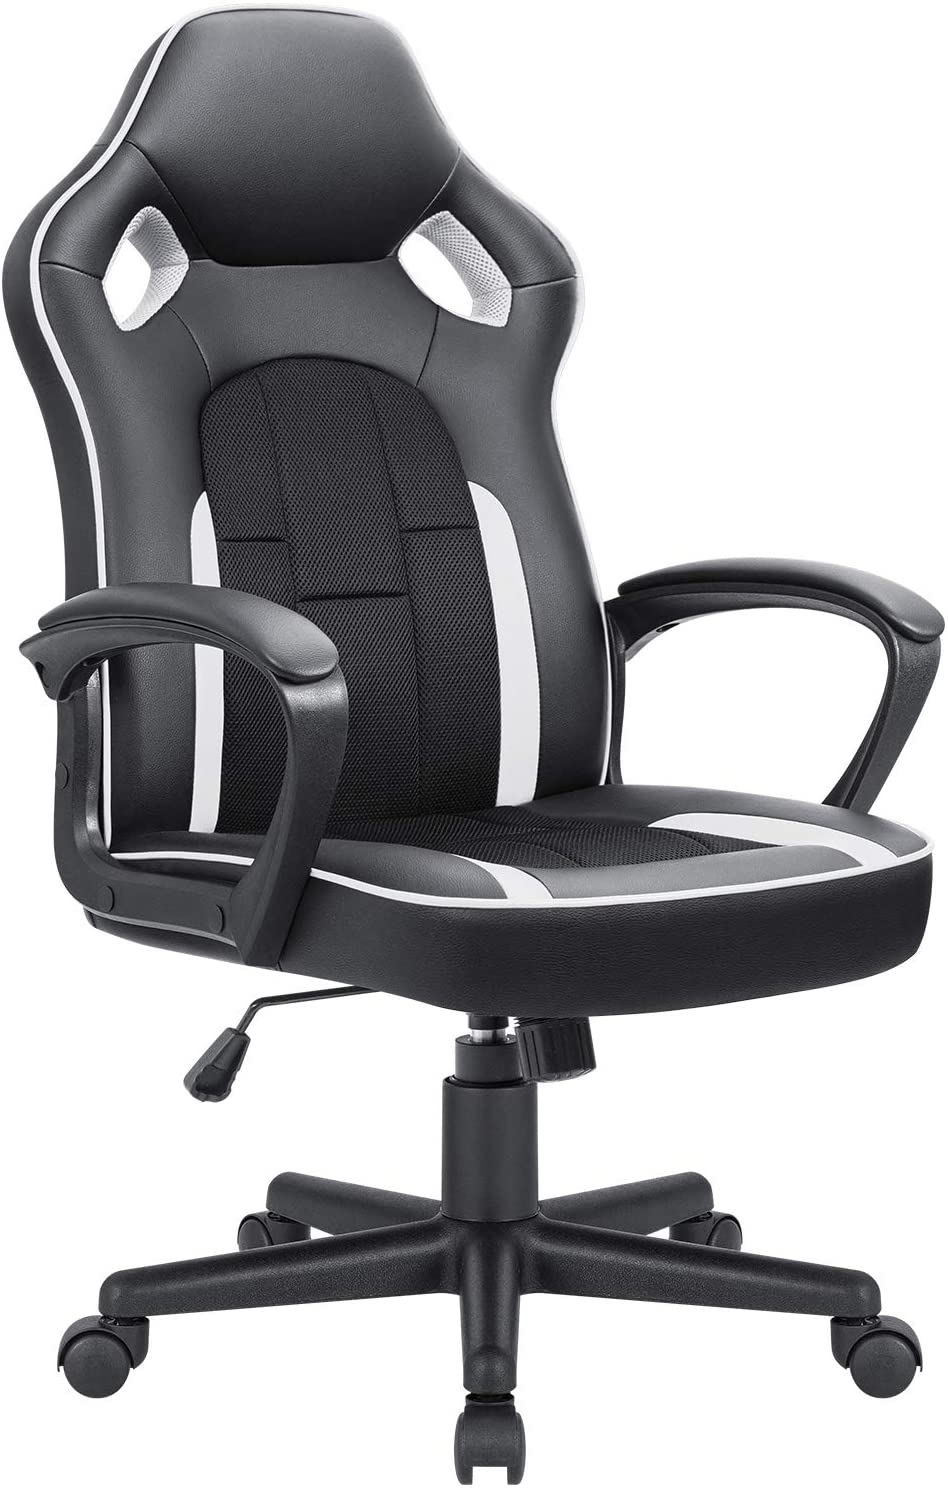 Office Chair Desk Leather Gaming Chair, High Back Ergonomic Adjustable Racing Chair,Task Swivel Executive Computer Chair Headrest and Lumbar Support (Black&White)